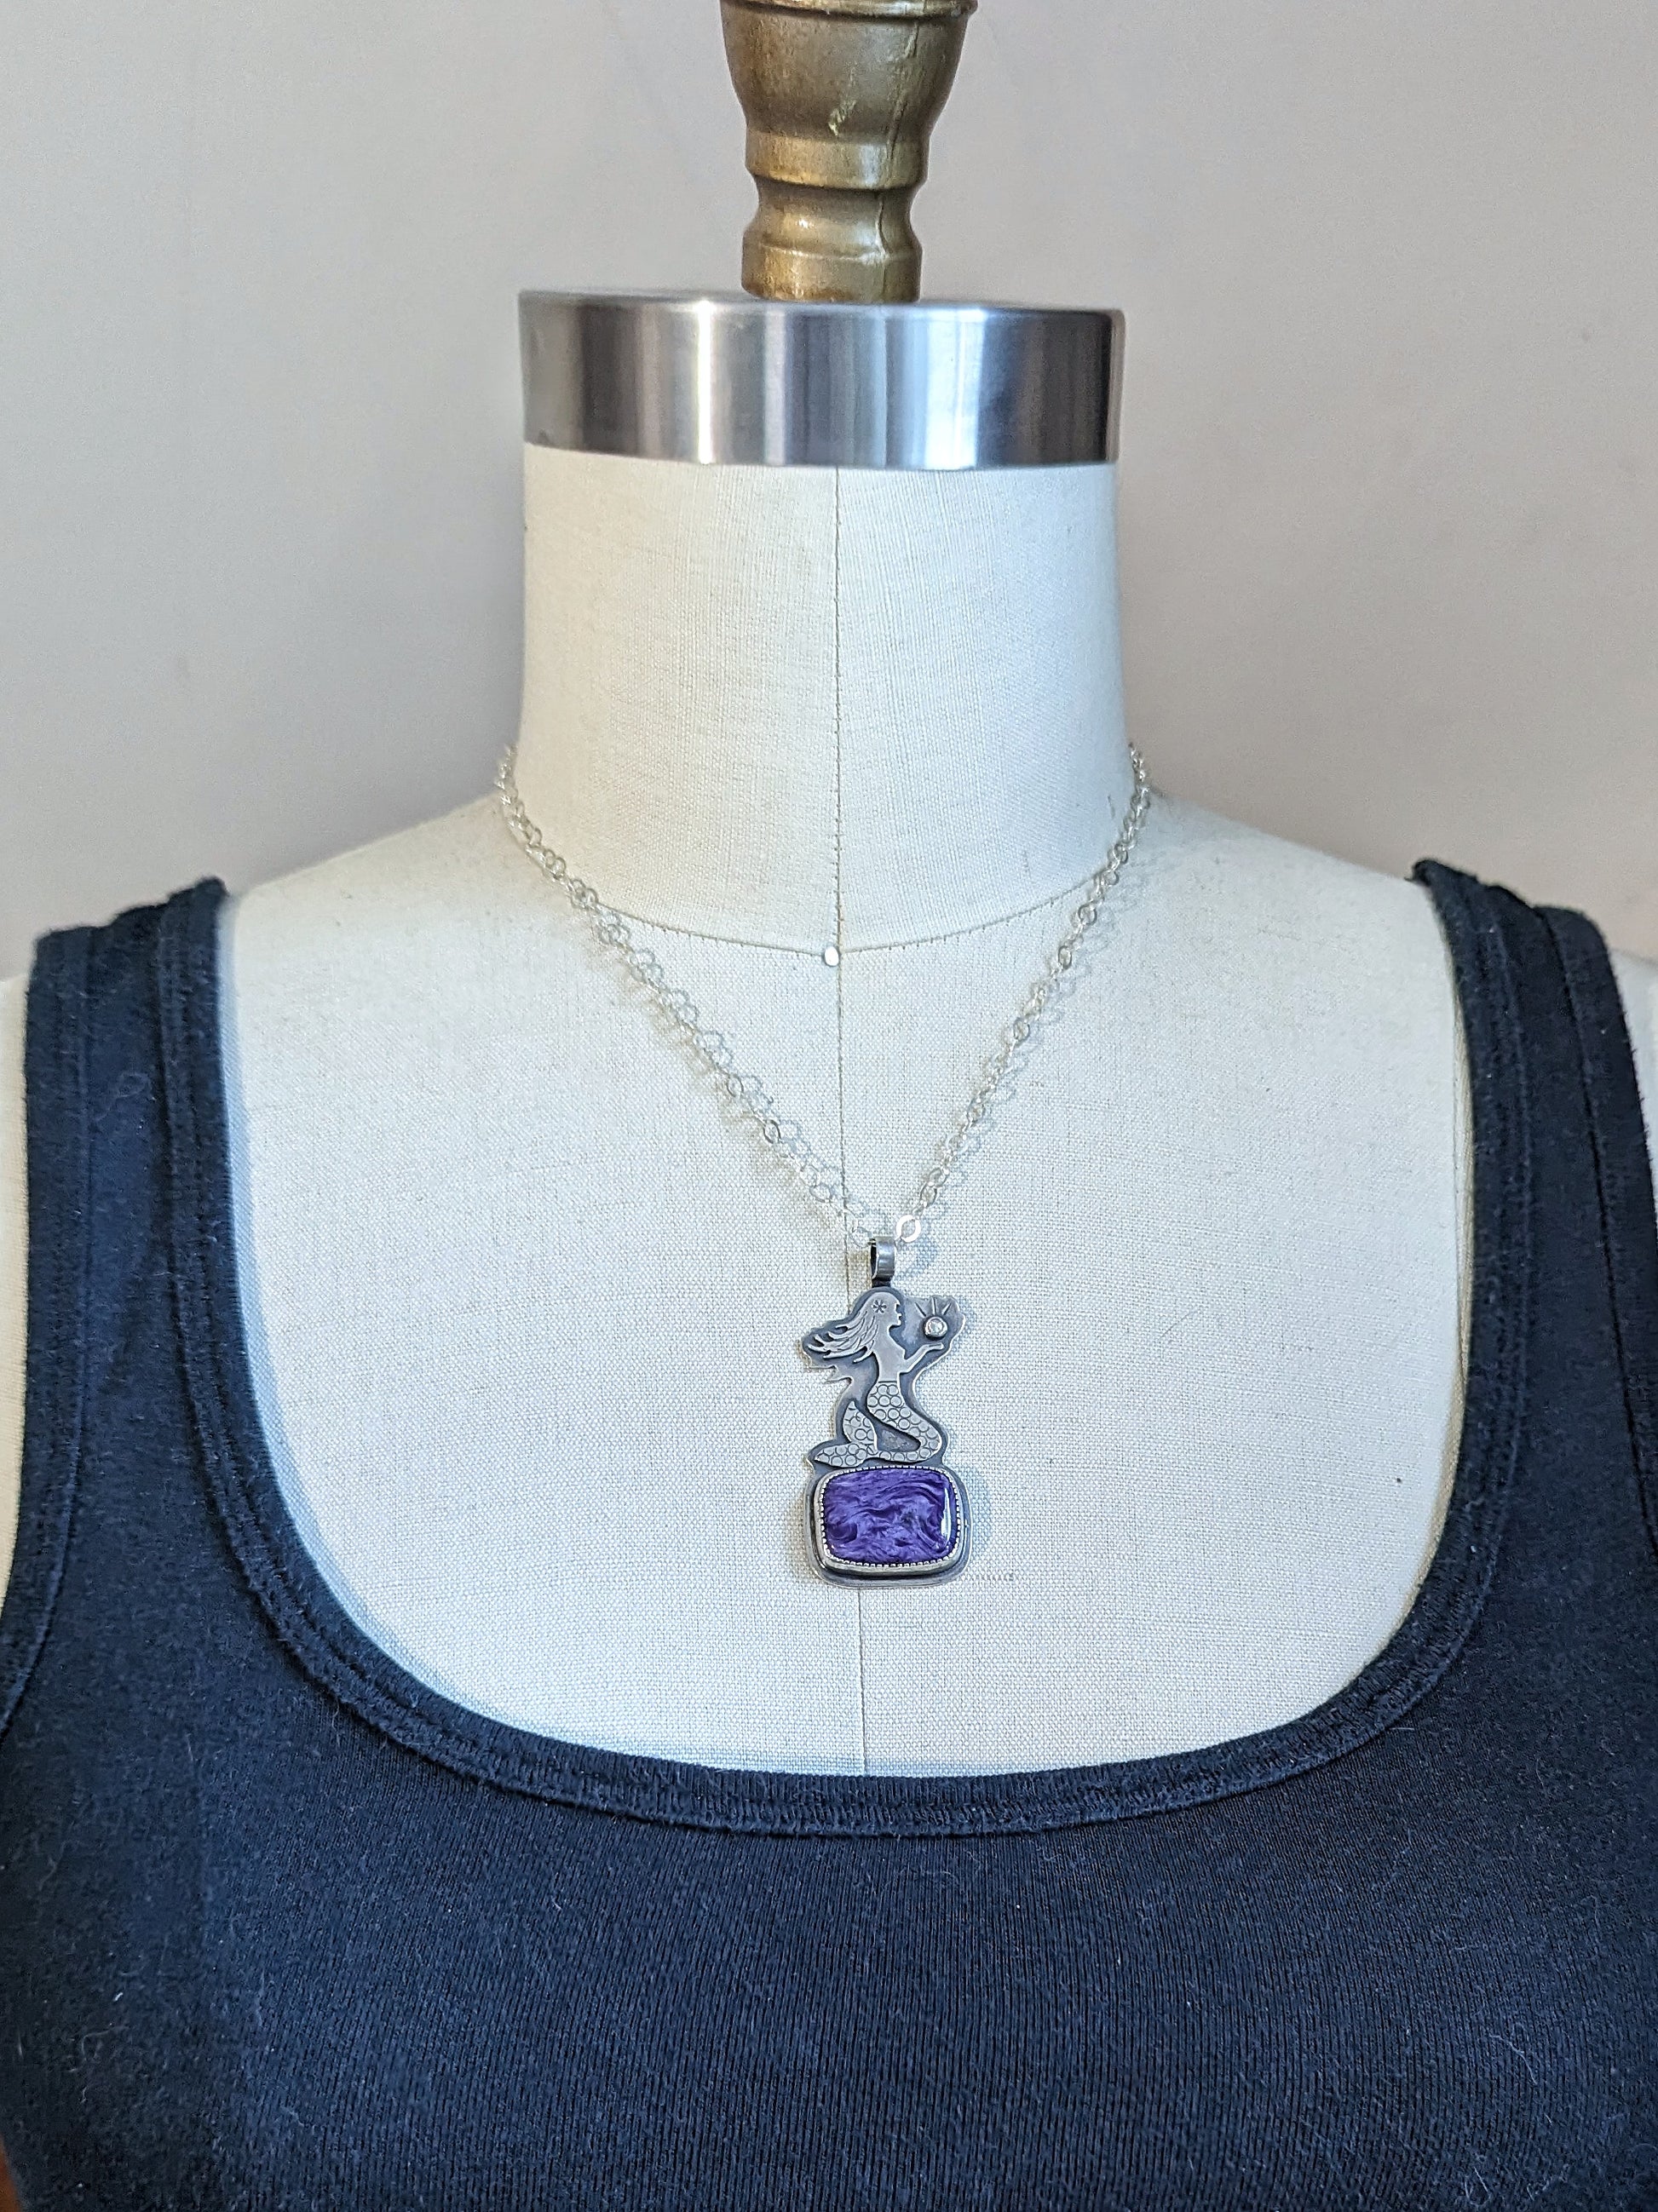 Charoite mermaid necklace on bust